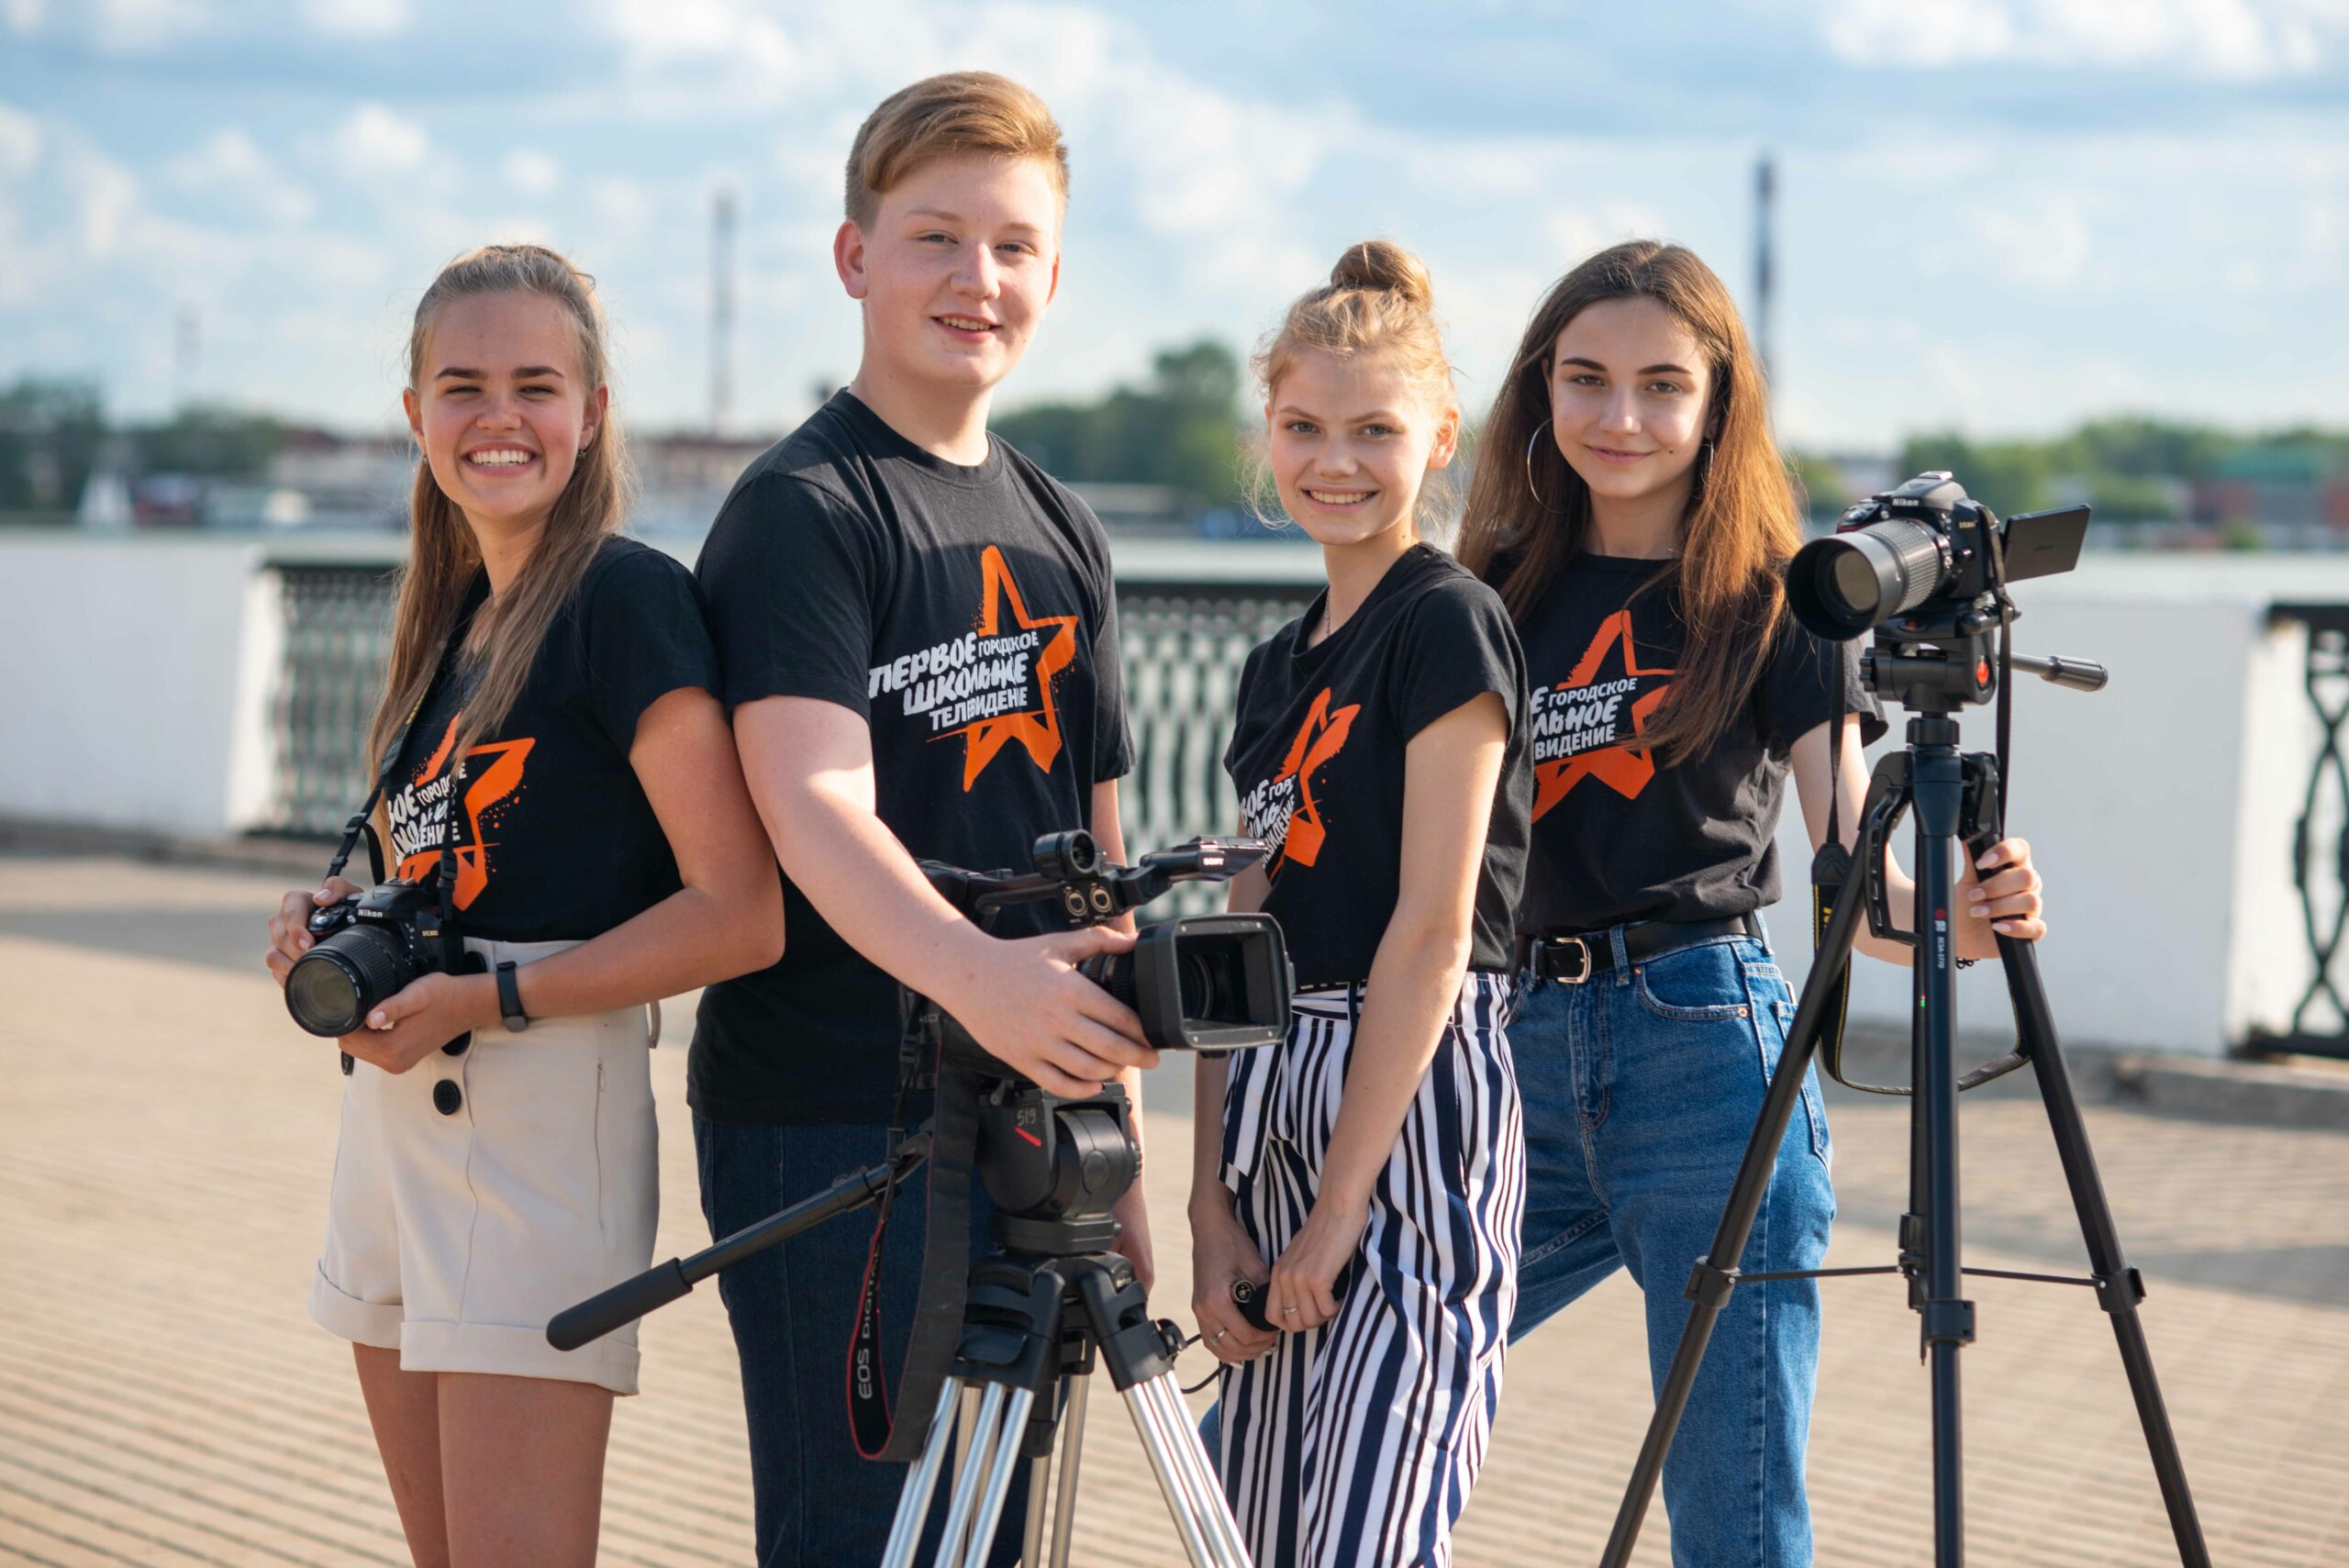 From the Ozarks to the Ural Plains—Youth TV Bridge Brings US and Russian Teens Together